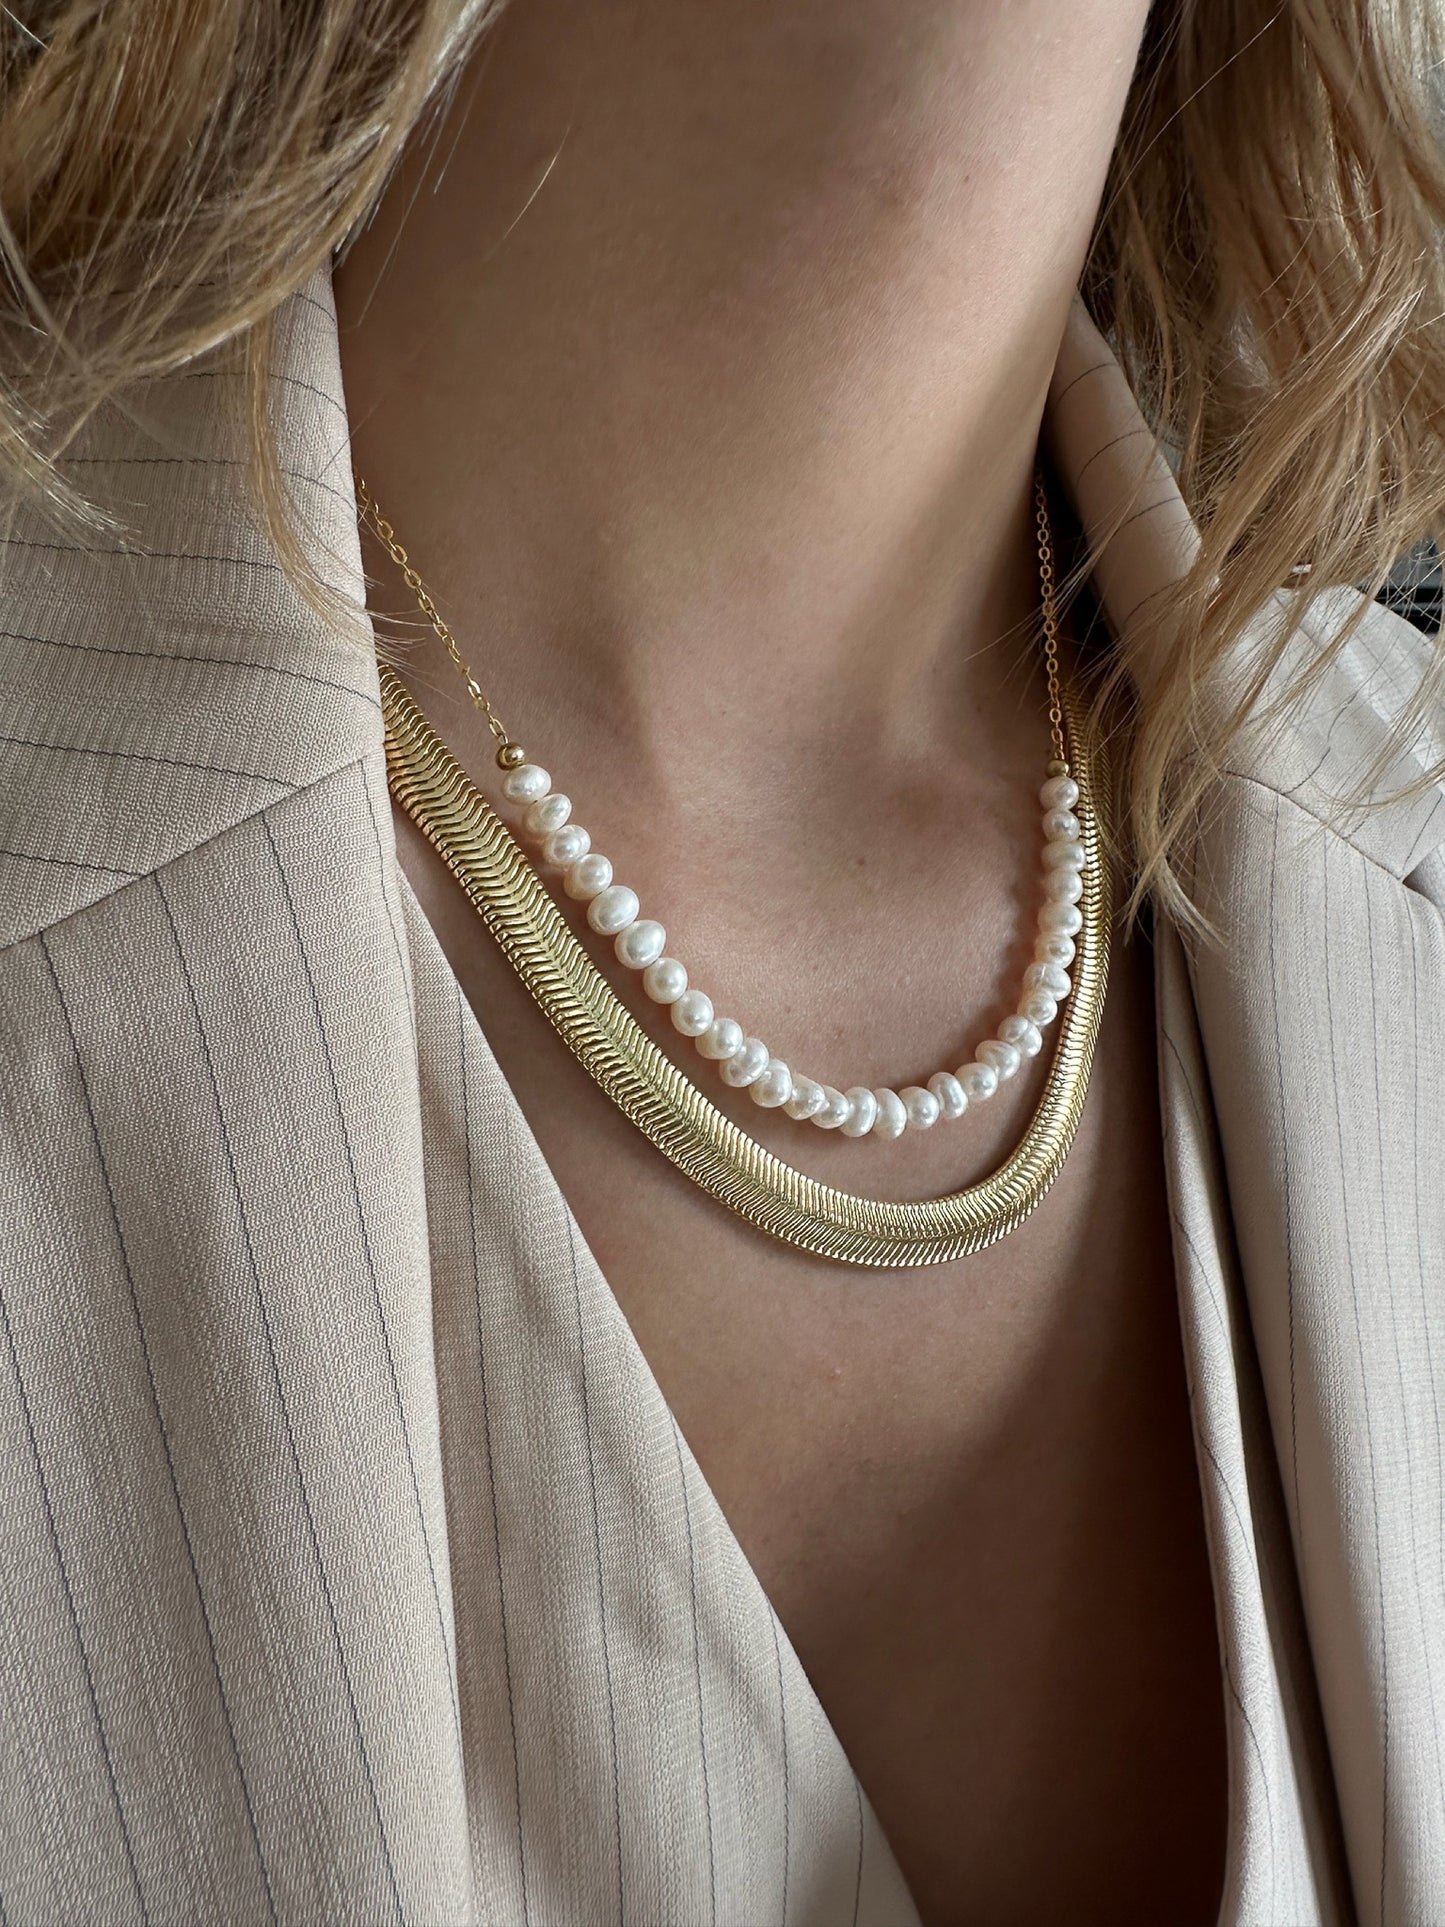 9ct. Gold Pearl Necklace